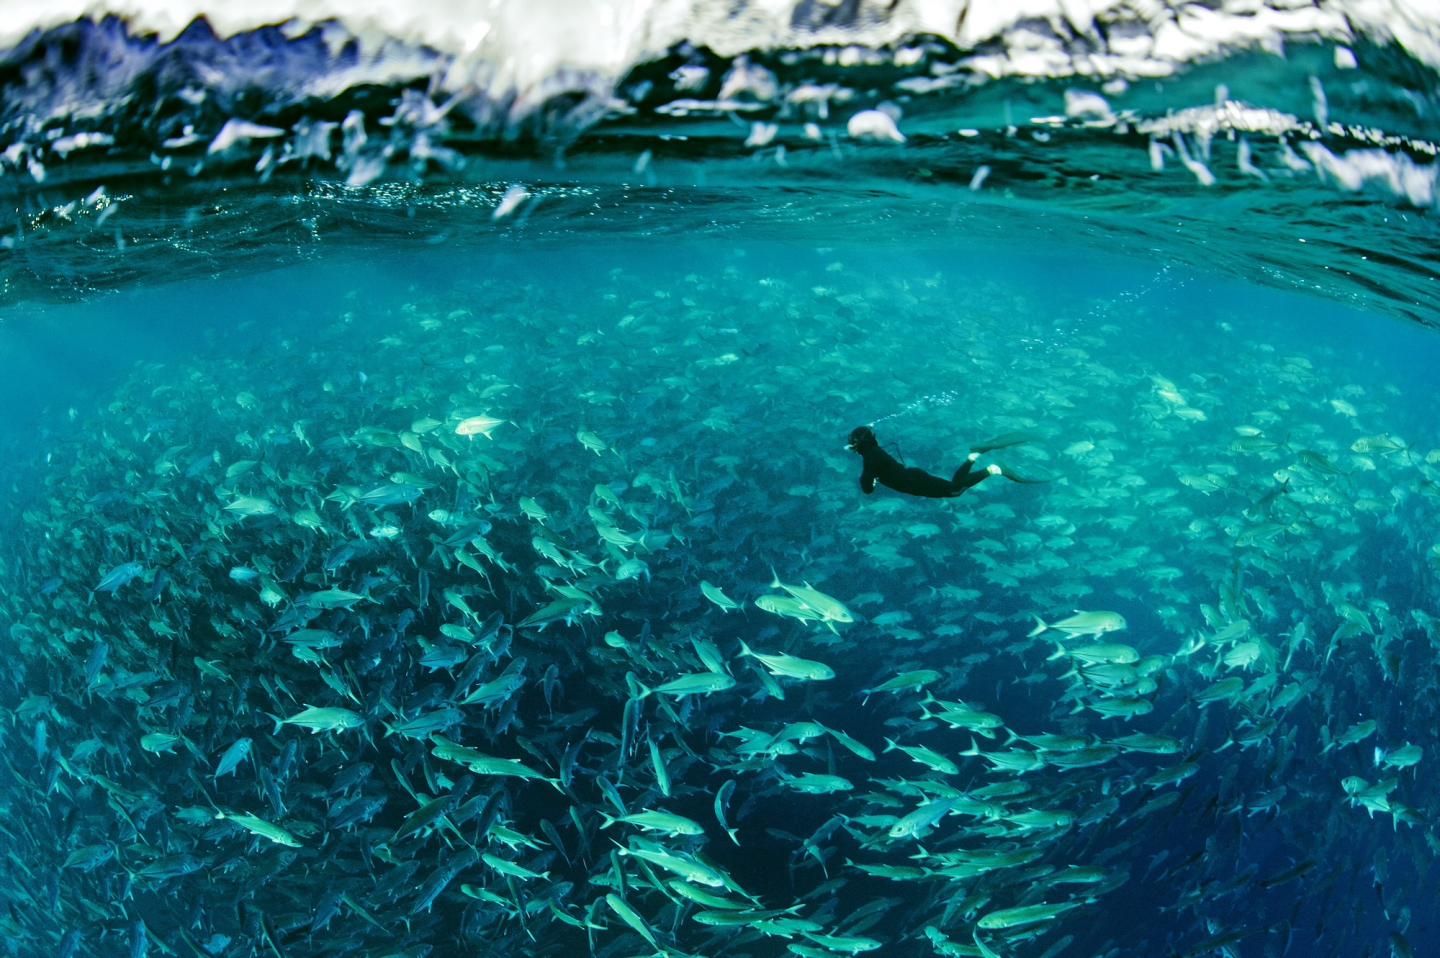 A diver swims in a huge shoal of fish just beneath the surface of the ocean